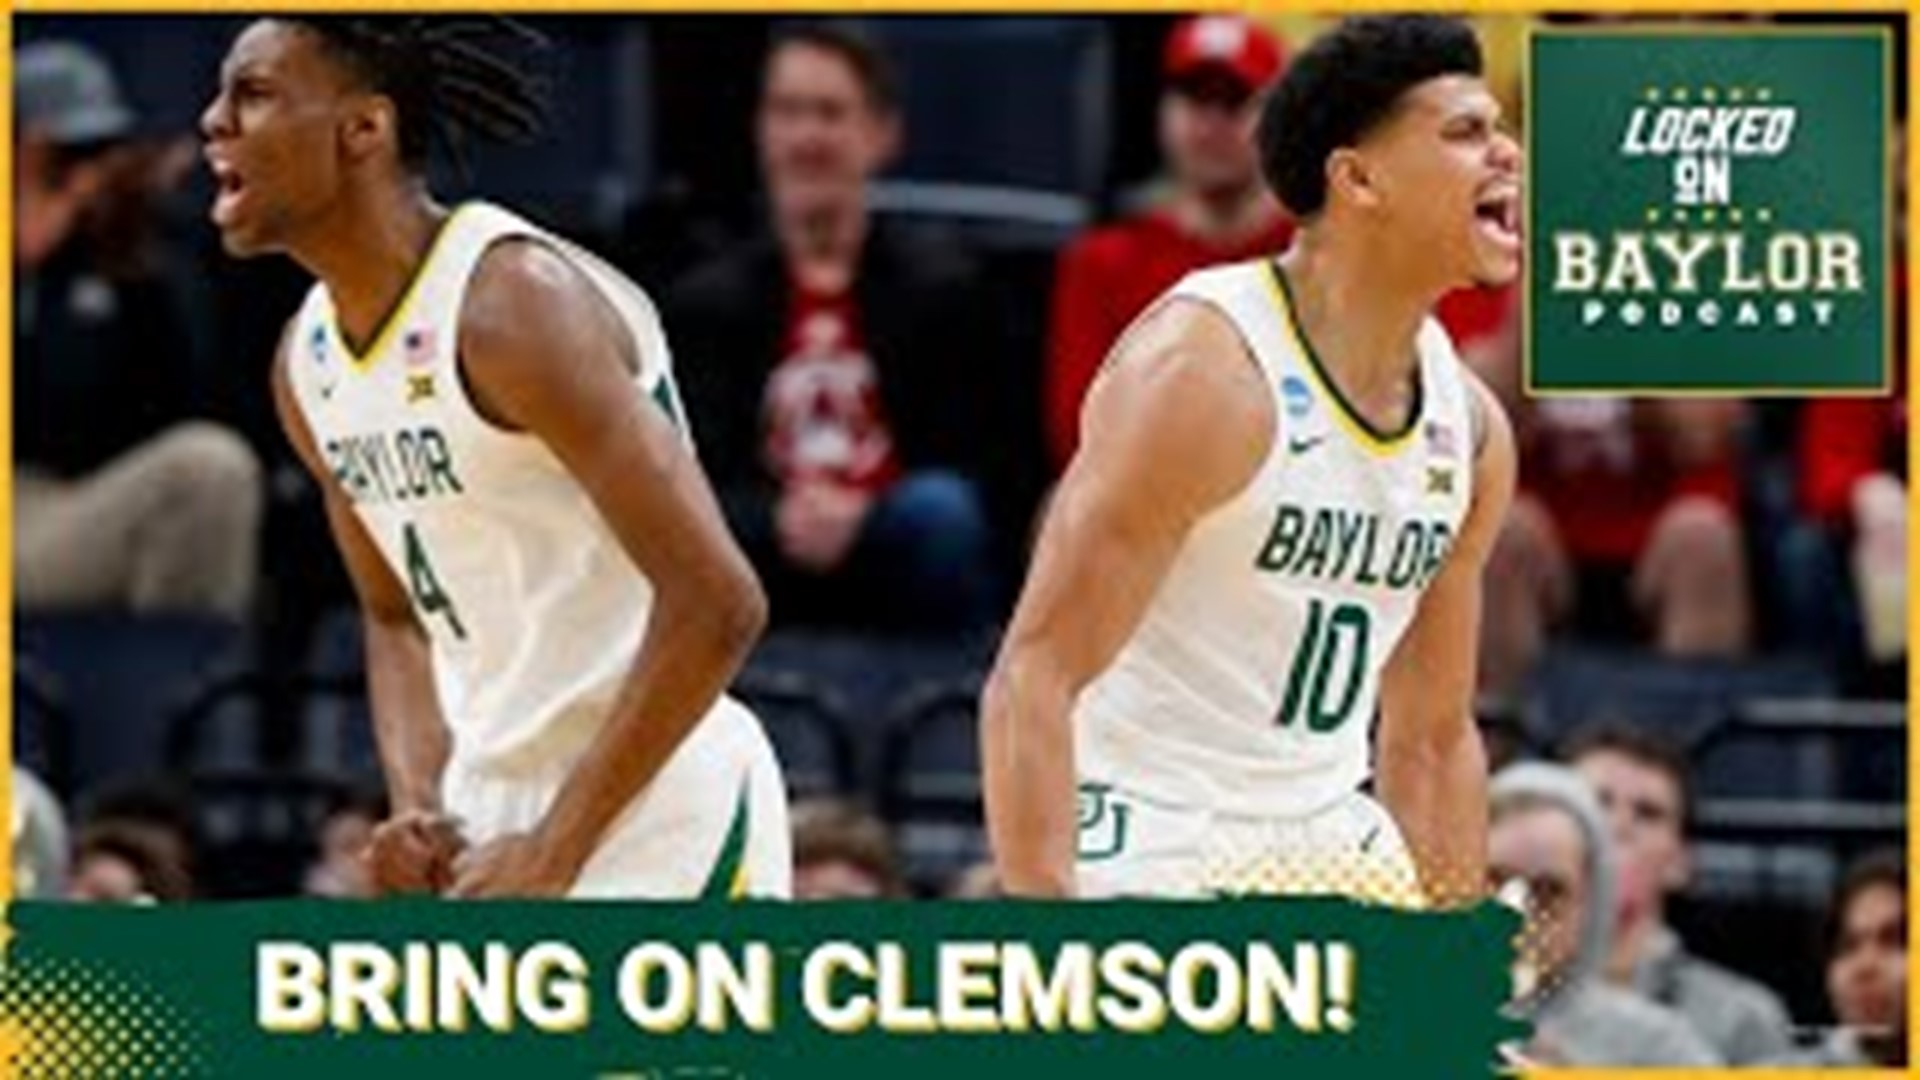 Both Baylor basketball teams have Sweet 16 berths on the line Sunday, with the men taking on Clemson at 5:10 and the ladies battling Virginia Tech at 7:00.